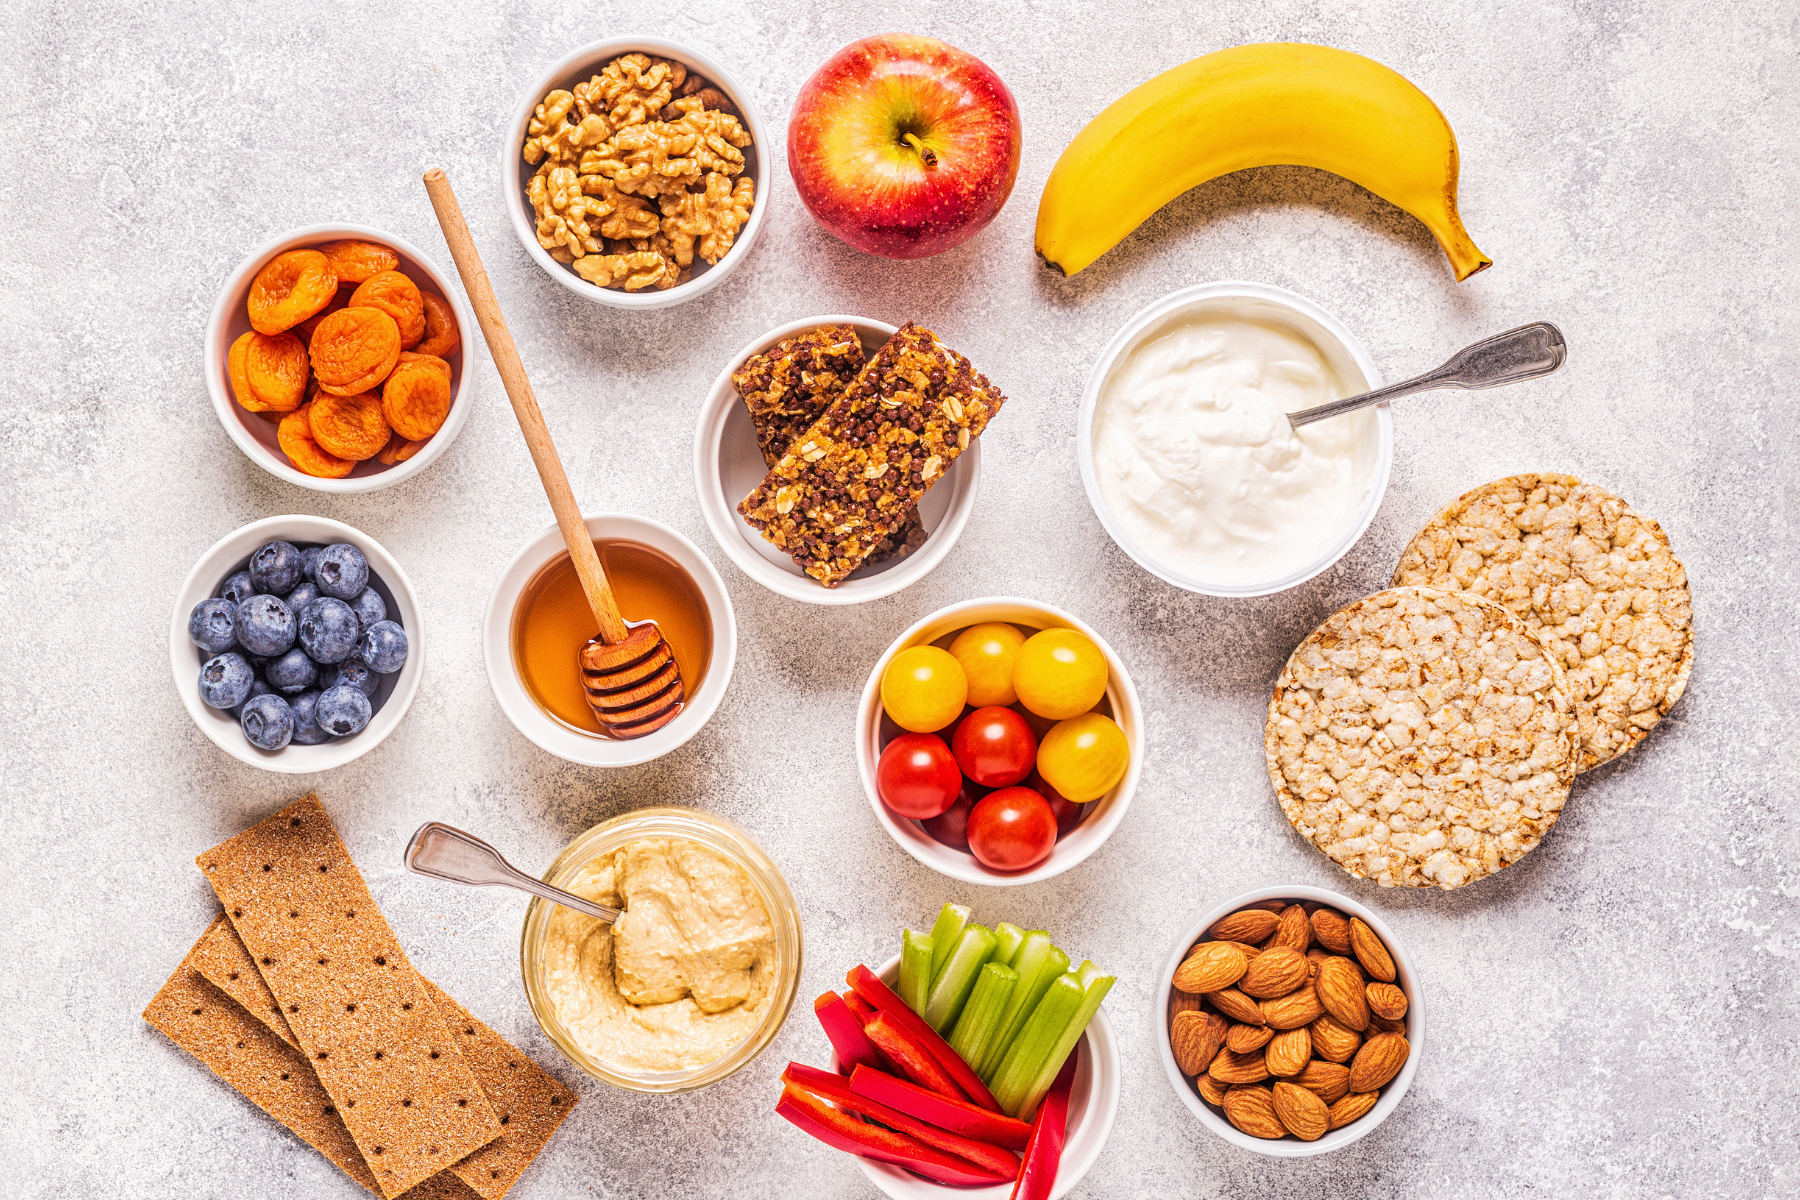 Healthy Snack Ideas for a Balanced Diet